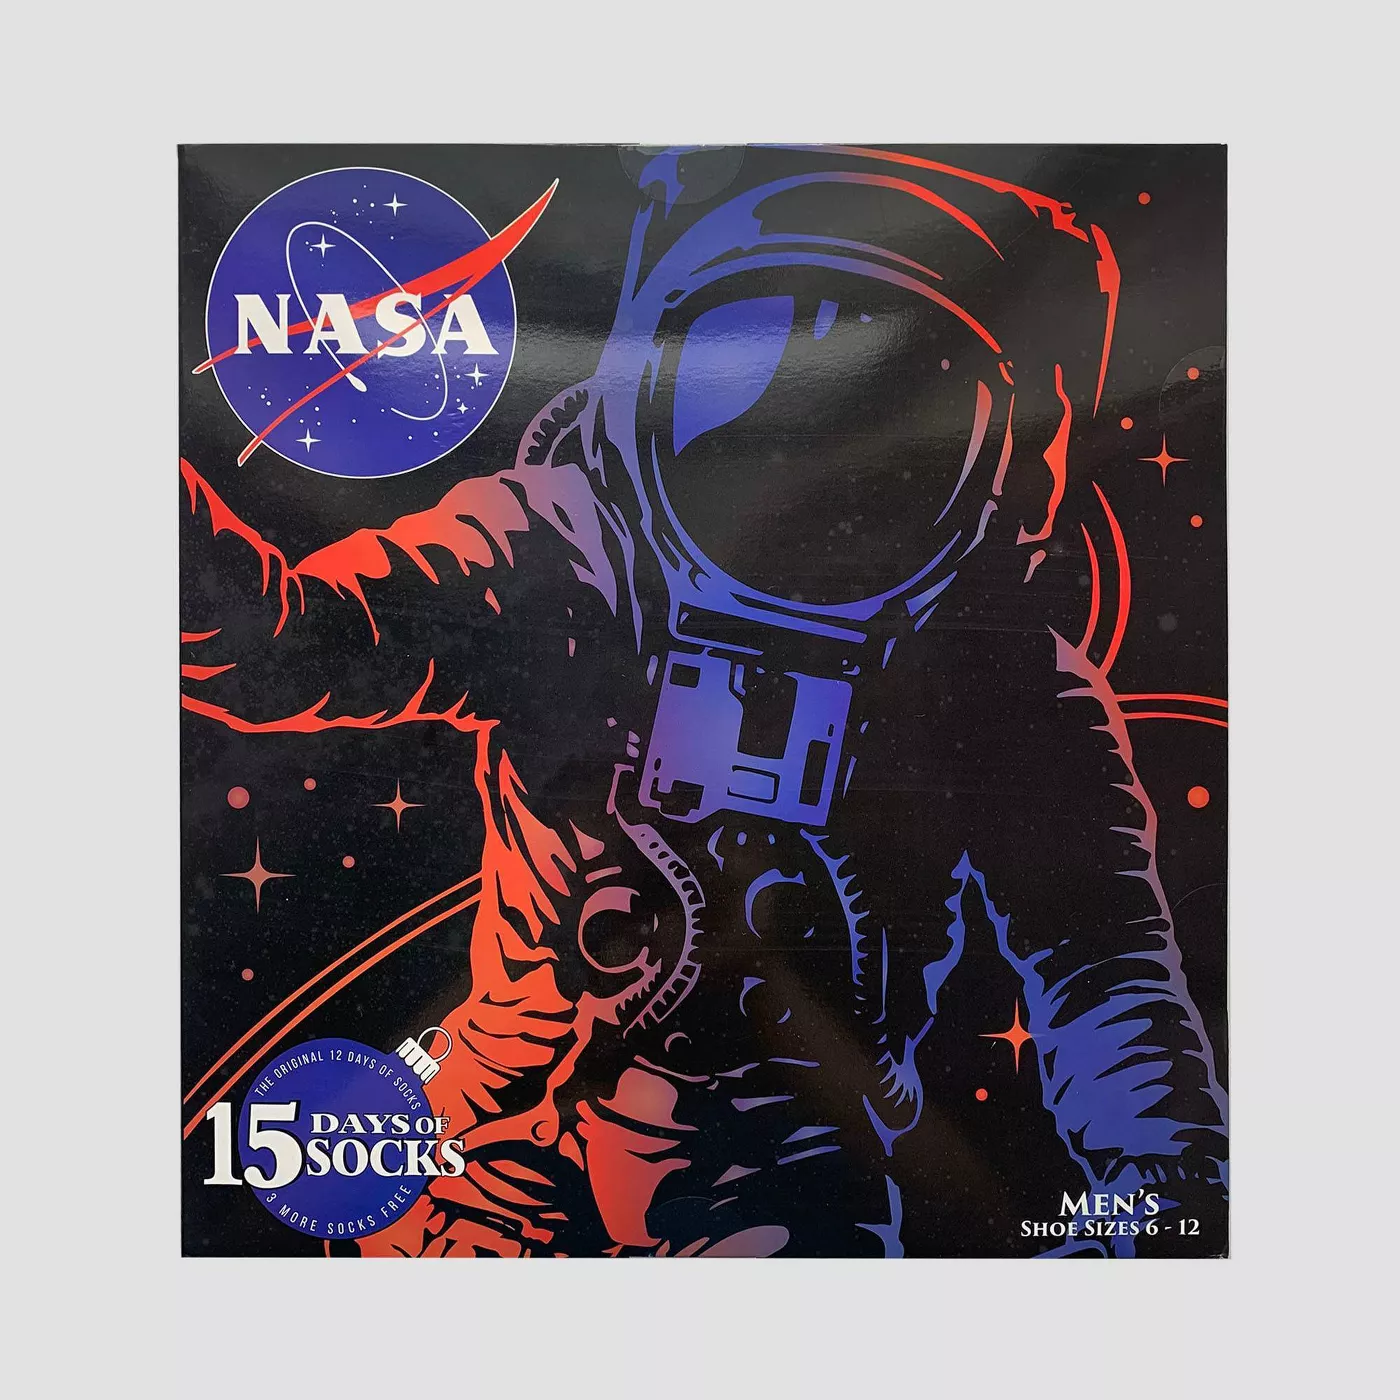 Men's NASA 15 Days of Socks Advent Calendar - Assorted Colors One Size - image 2 of 4